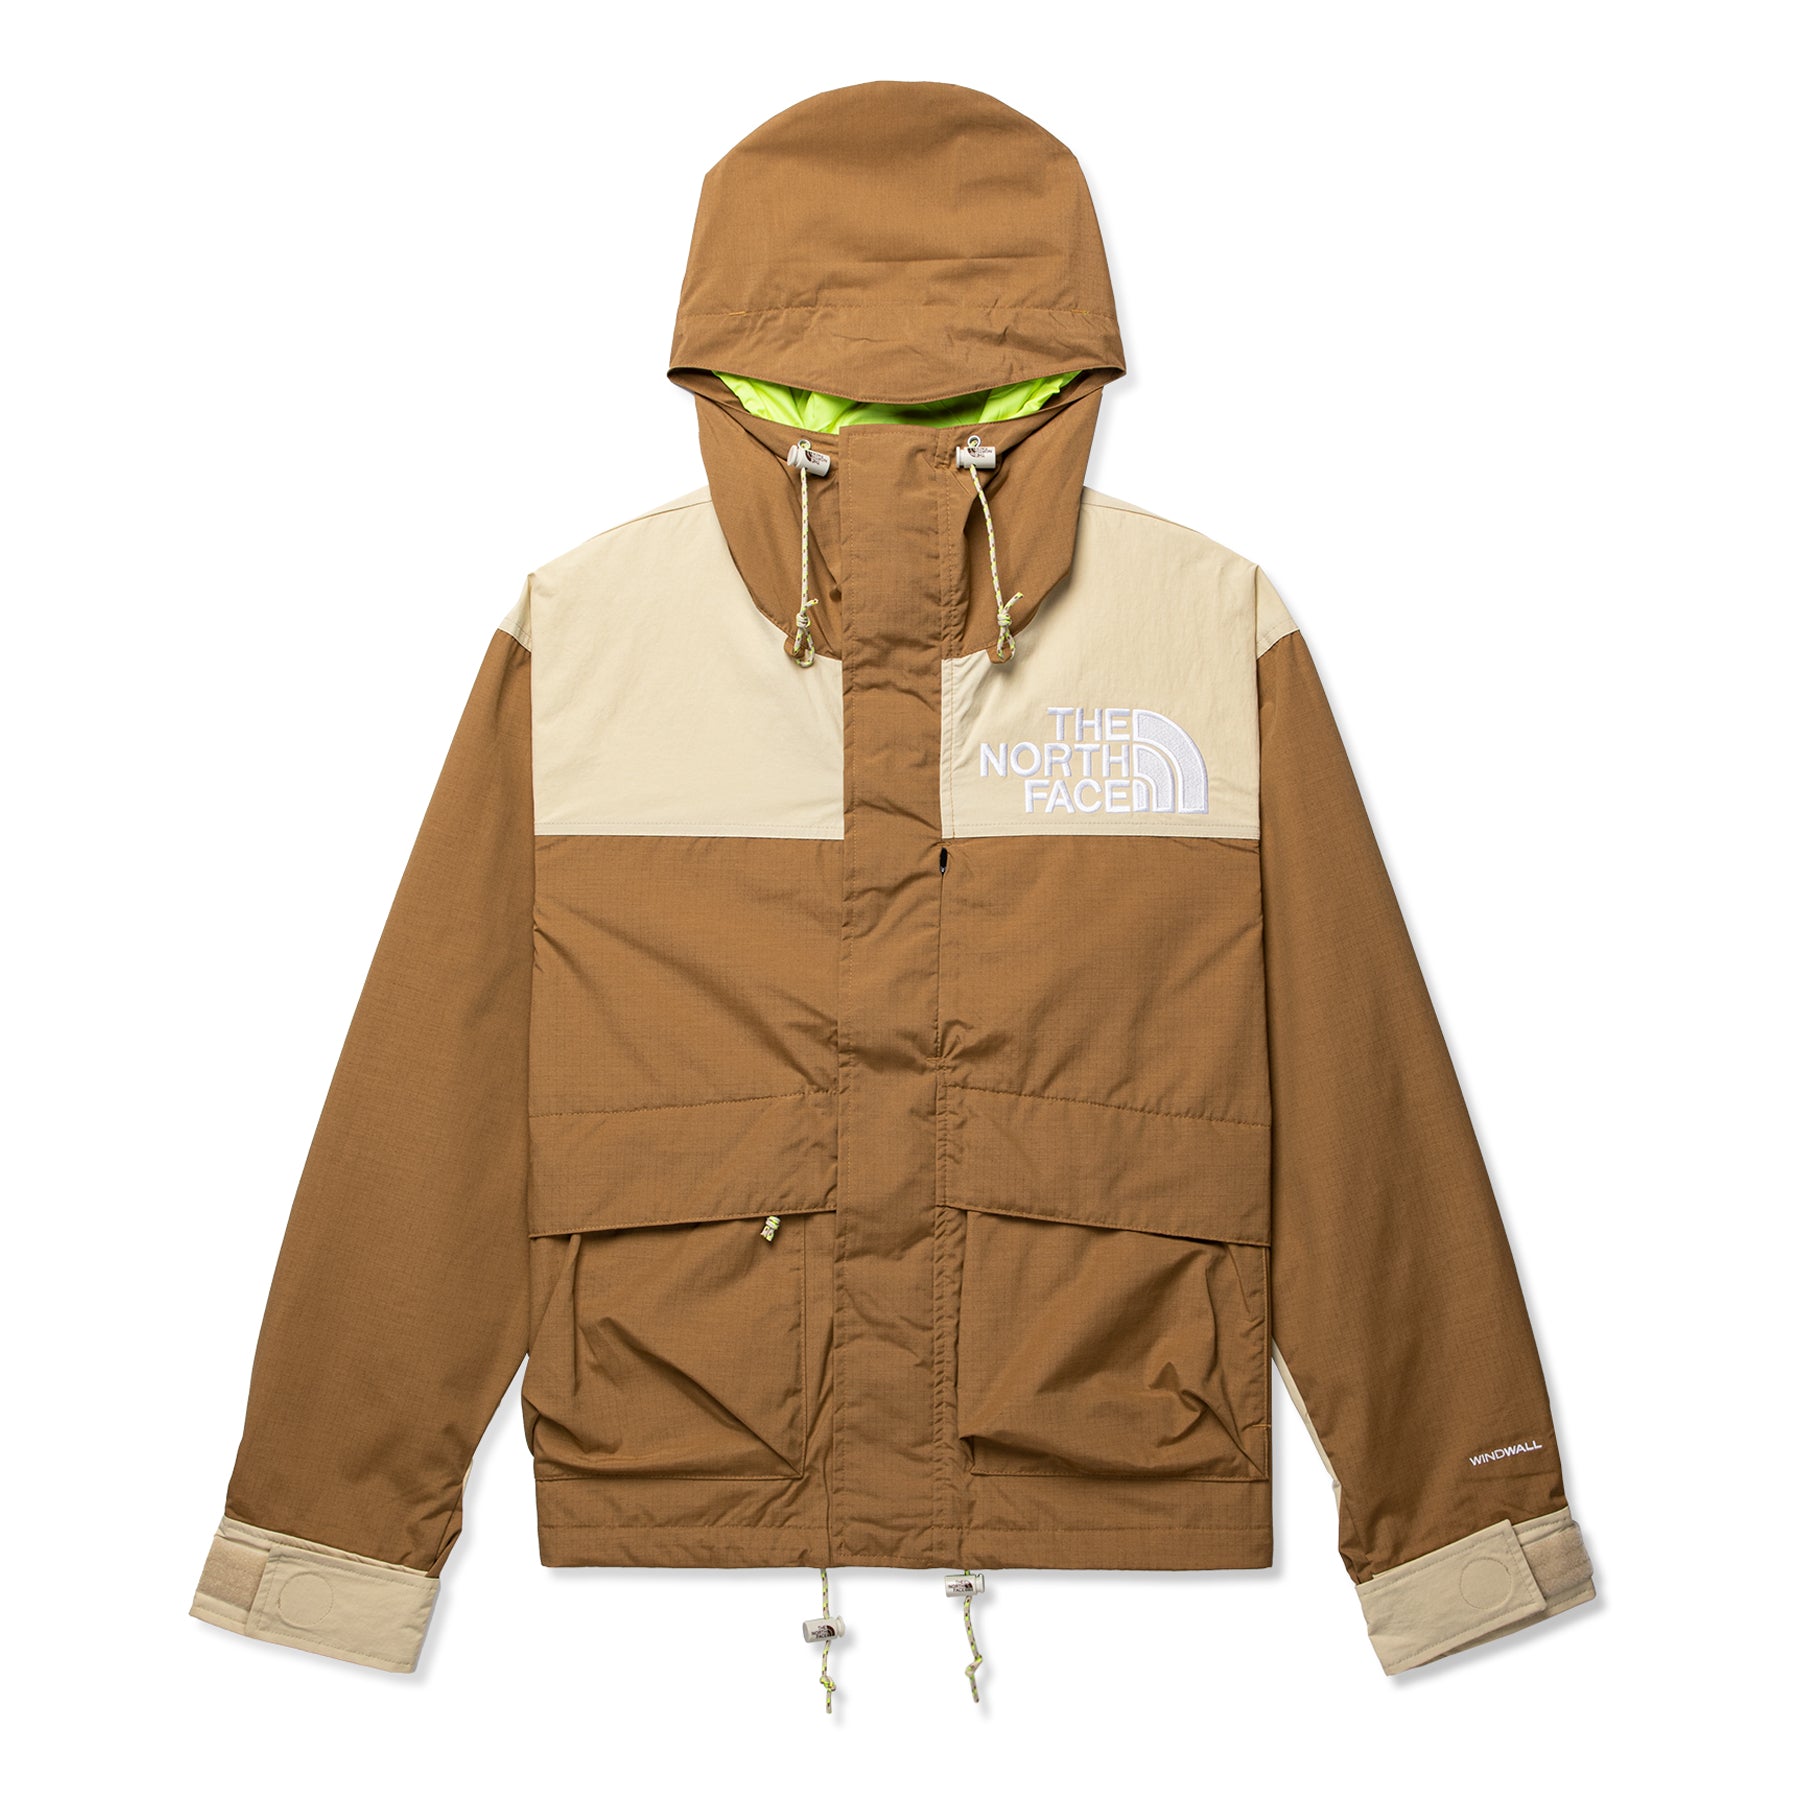 The North Face 86 Mountain Wind Jacket - Women's